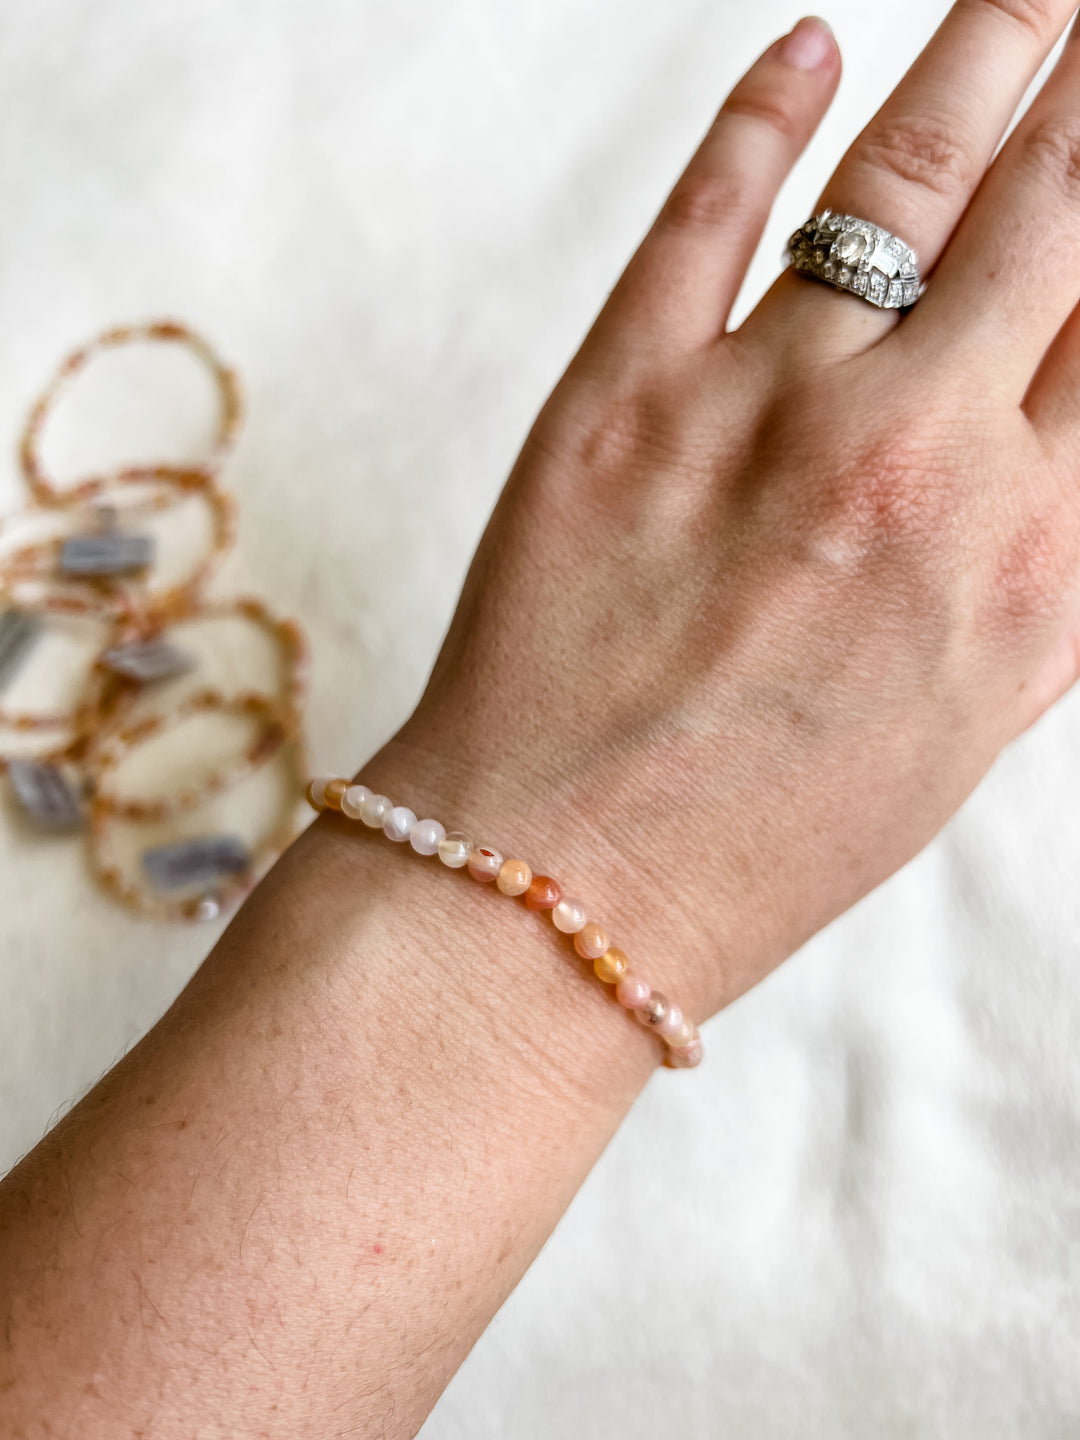 Pink Botswana Agate Crystal Stretch Bracelet | 7 inches